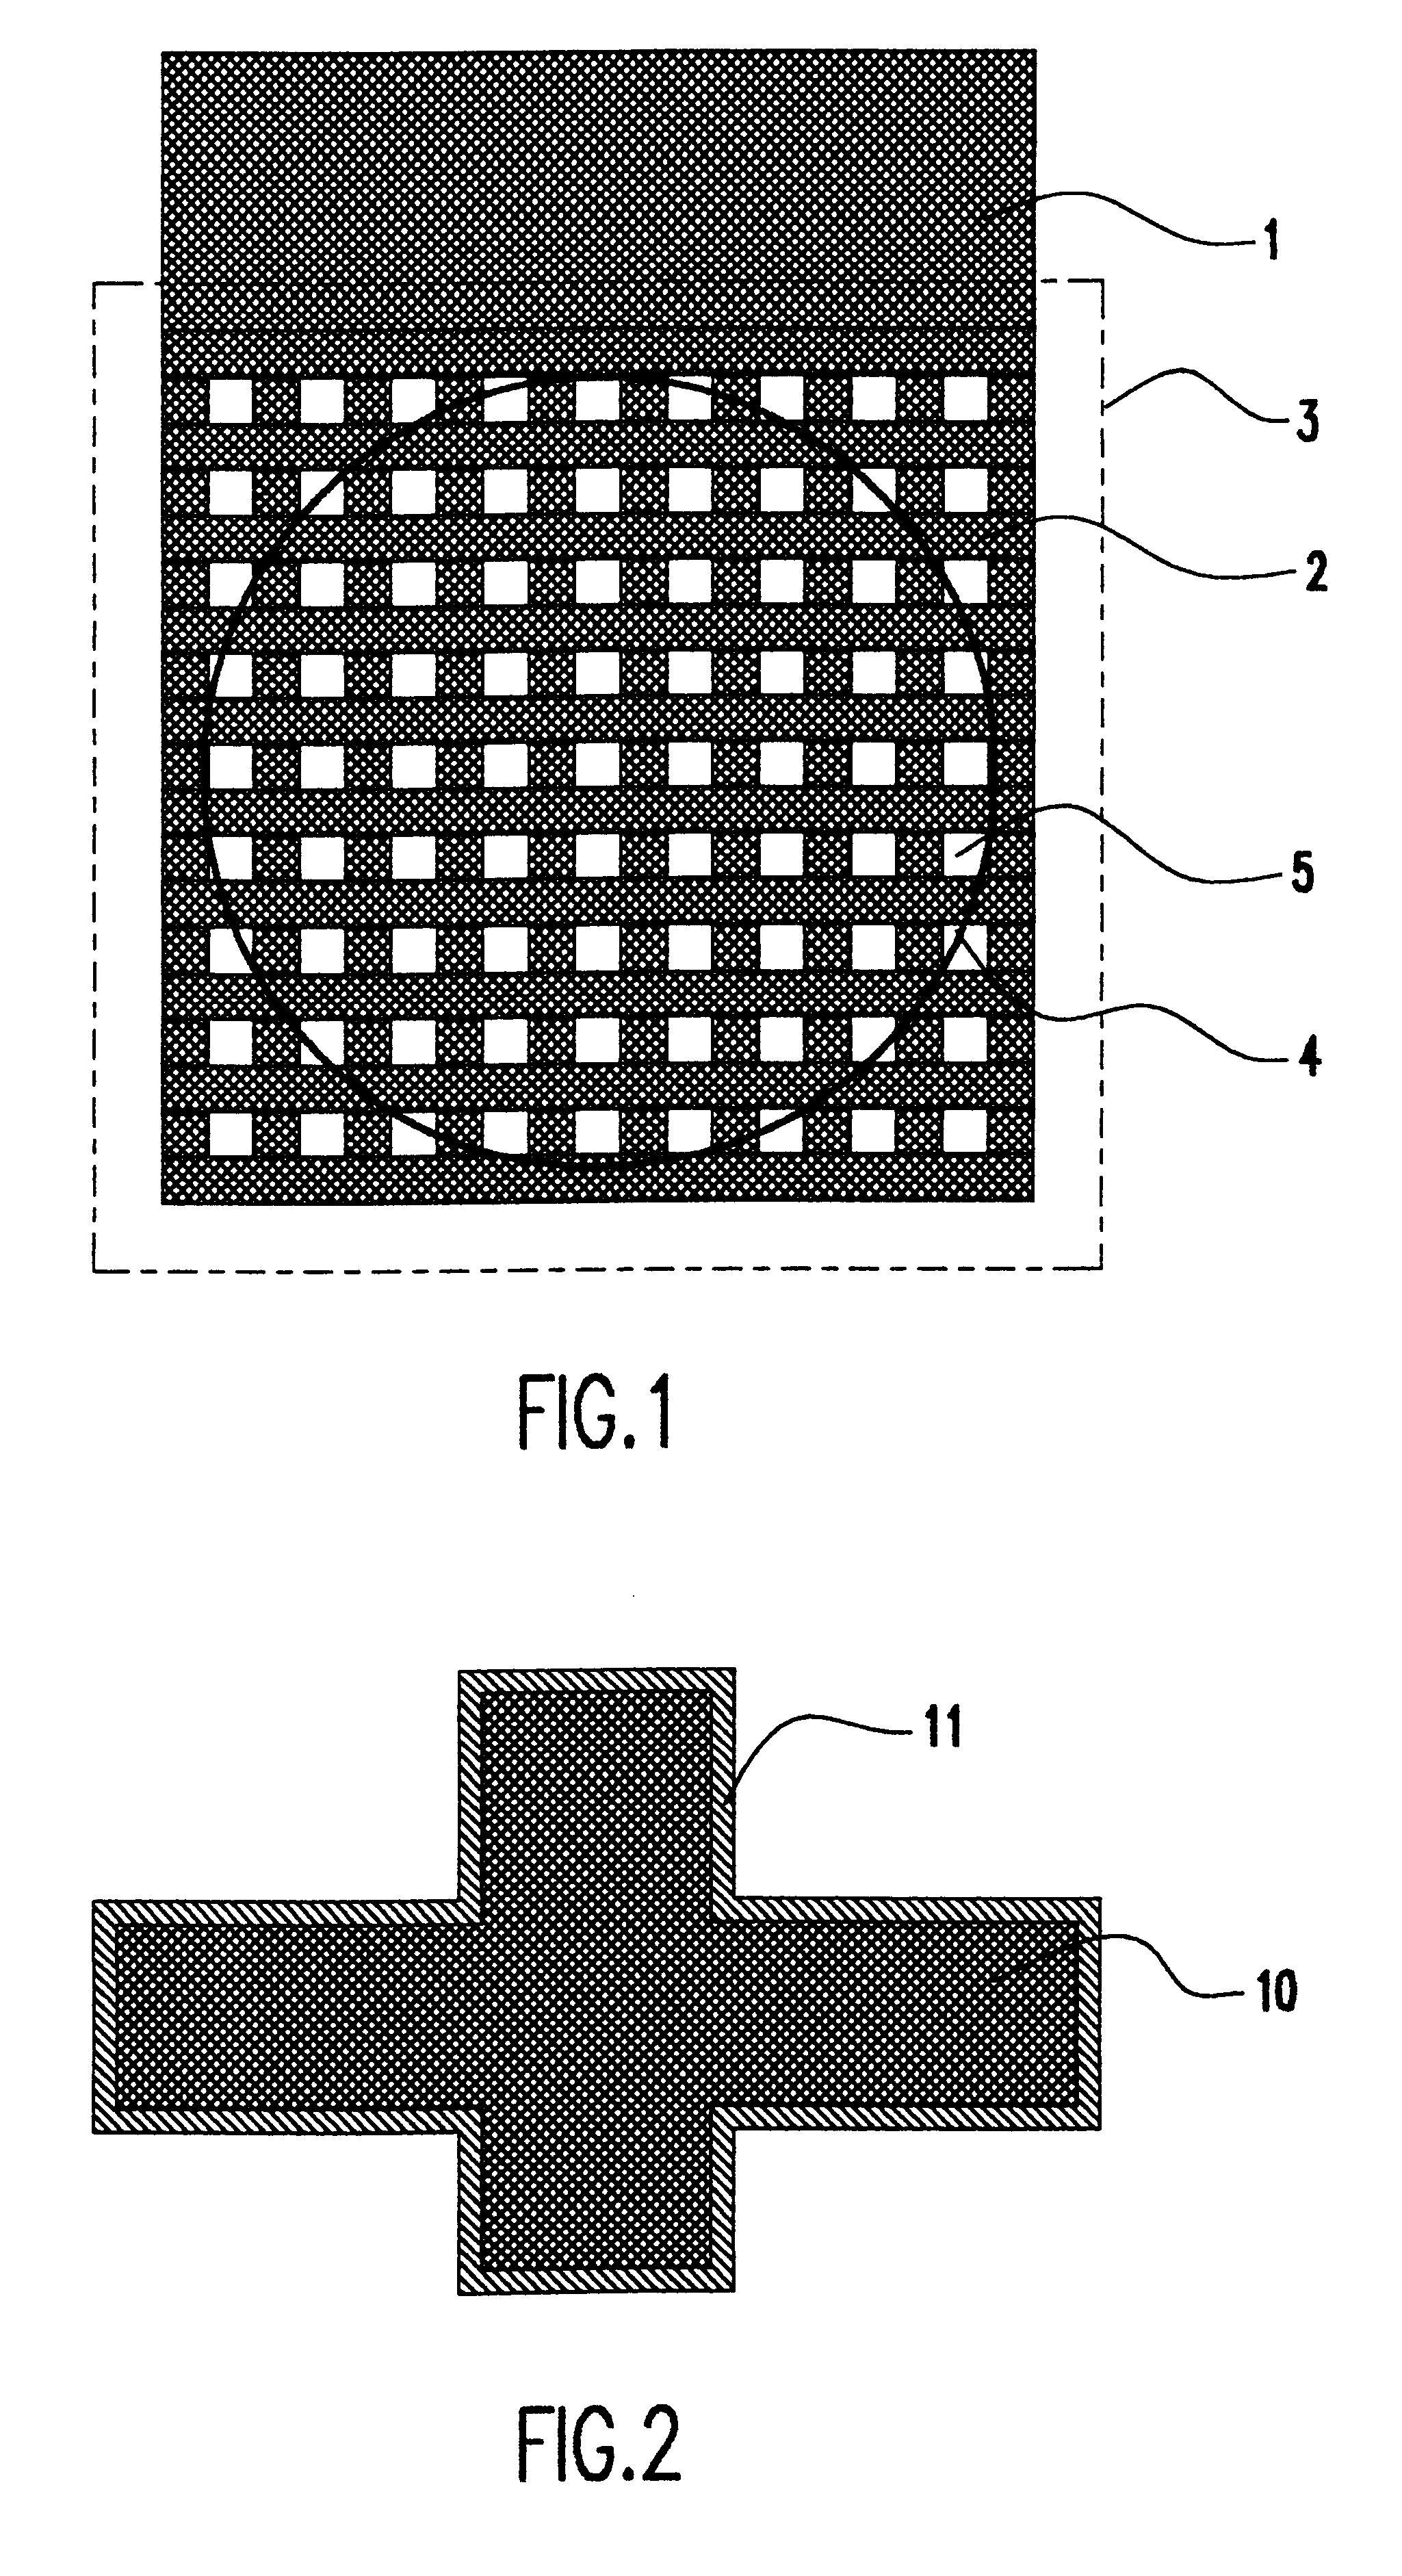 Self-aligned last-metal C4 interconnection layer for Cu technologies